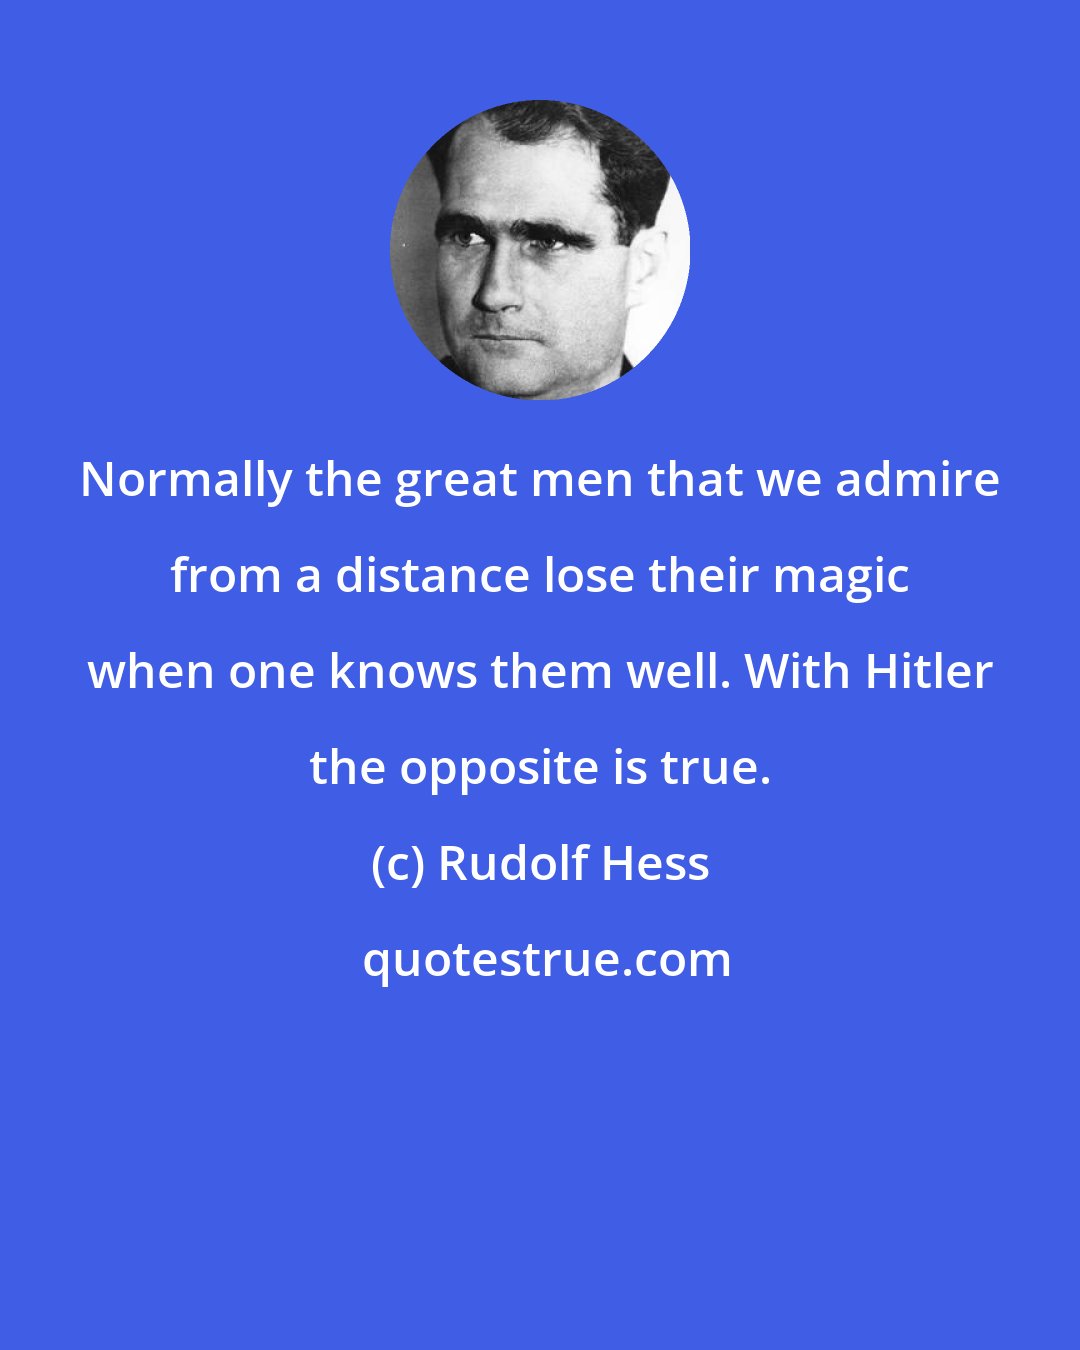 Rudolf Hess: Normally the great men that we admire from a distance lose their magic when one knows them well. With Hitler the opposite is true.